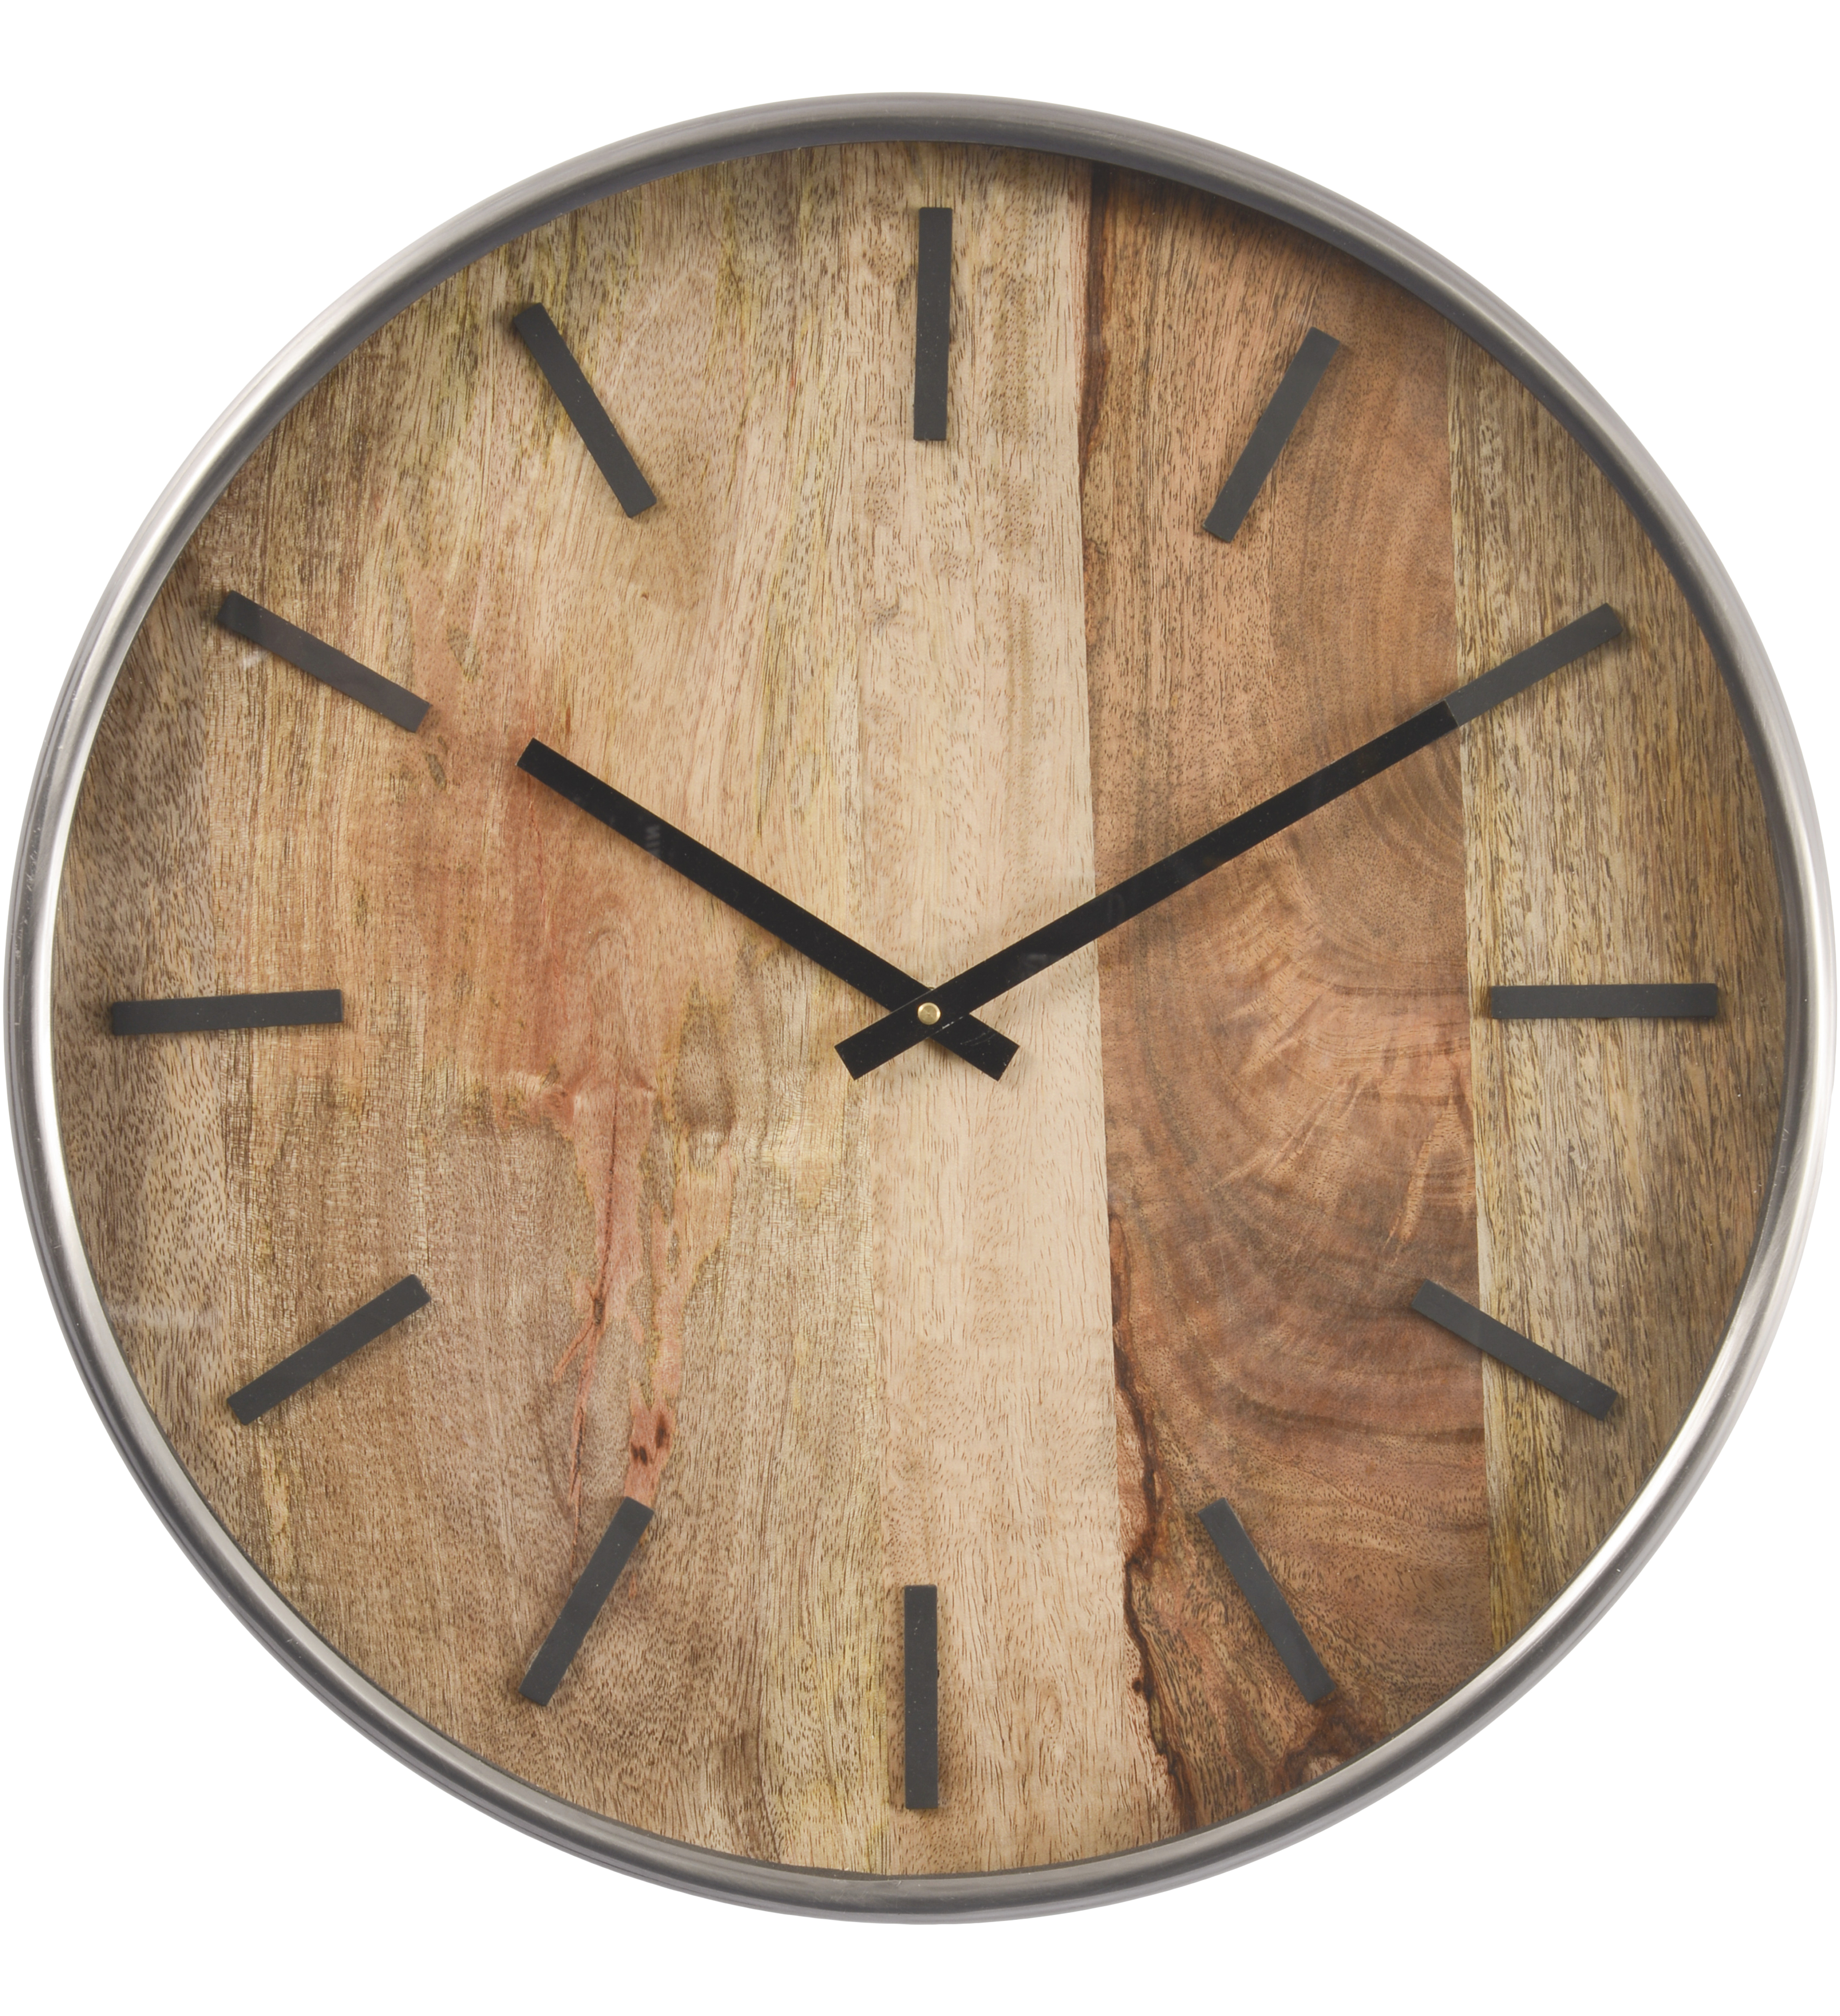 Forester rustic wood and steel wall clock, £66 at Artisanti